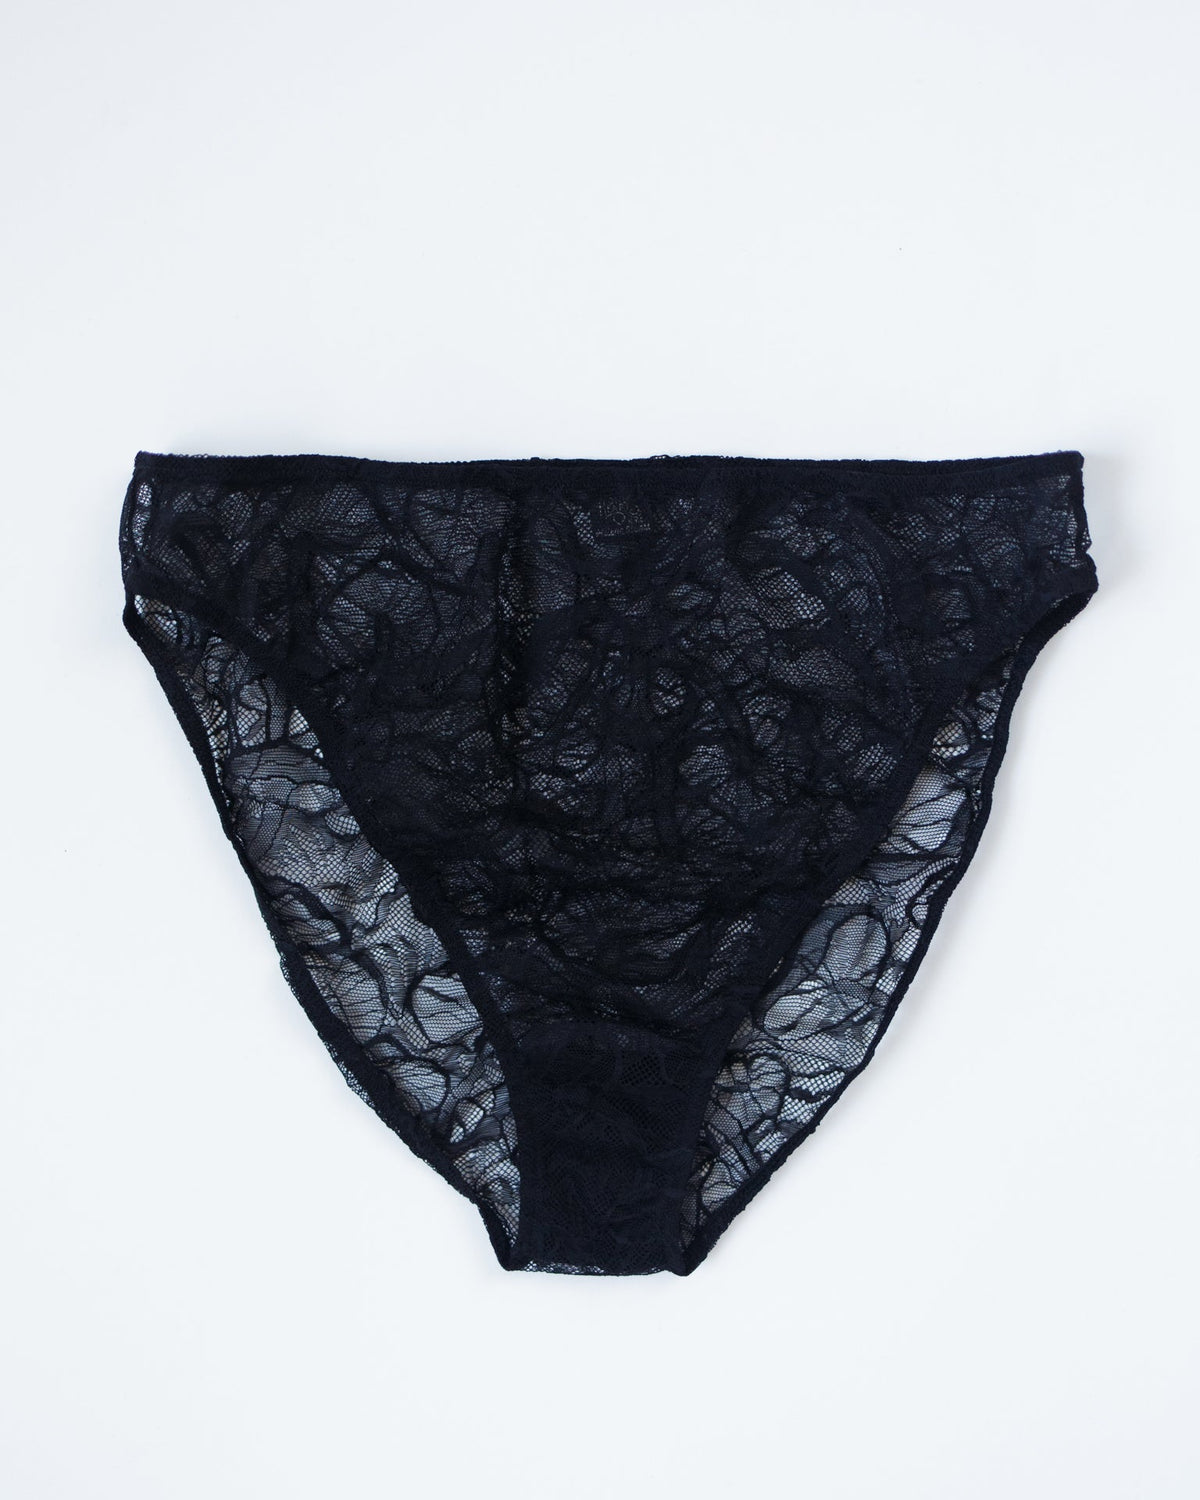 Only Hearts Lingiere Go Ask Alice High Cut Brief in Khol